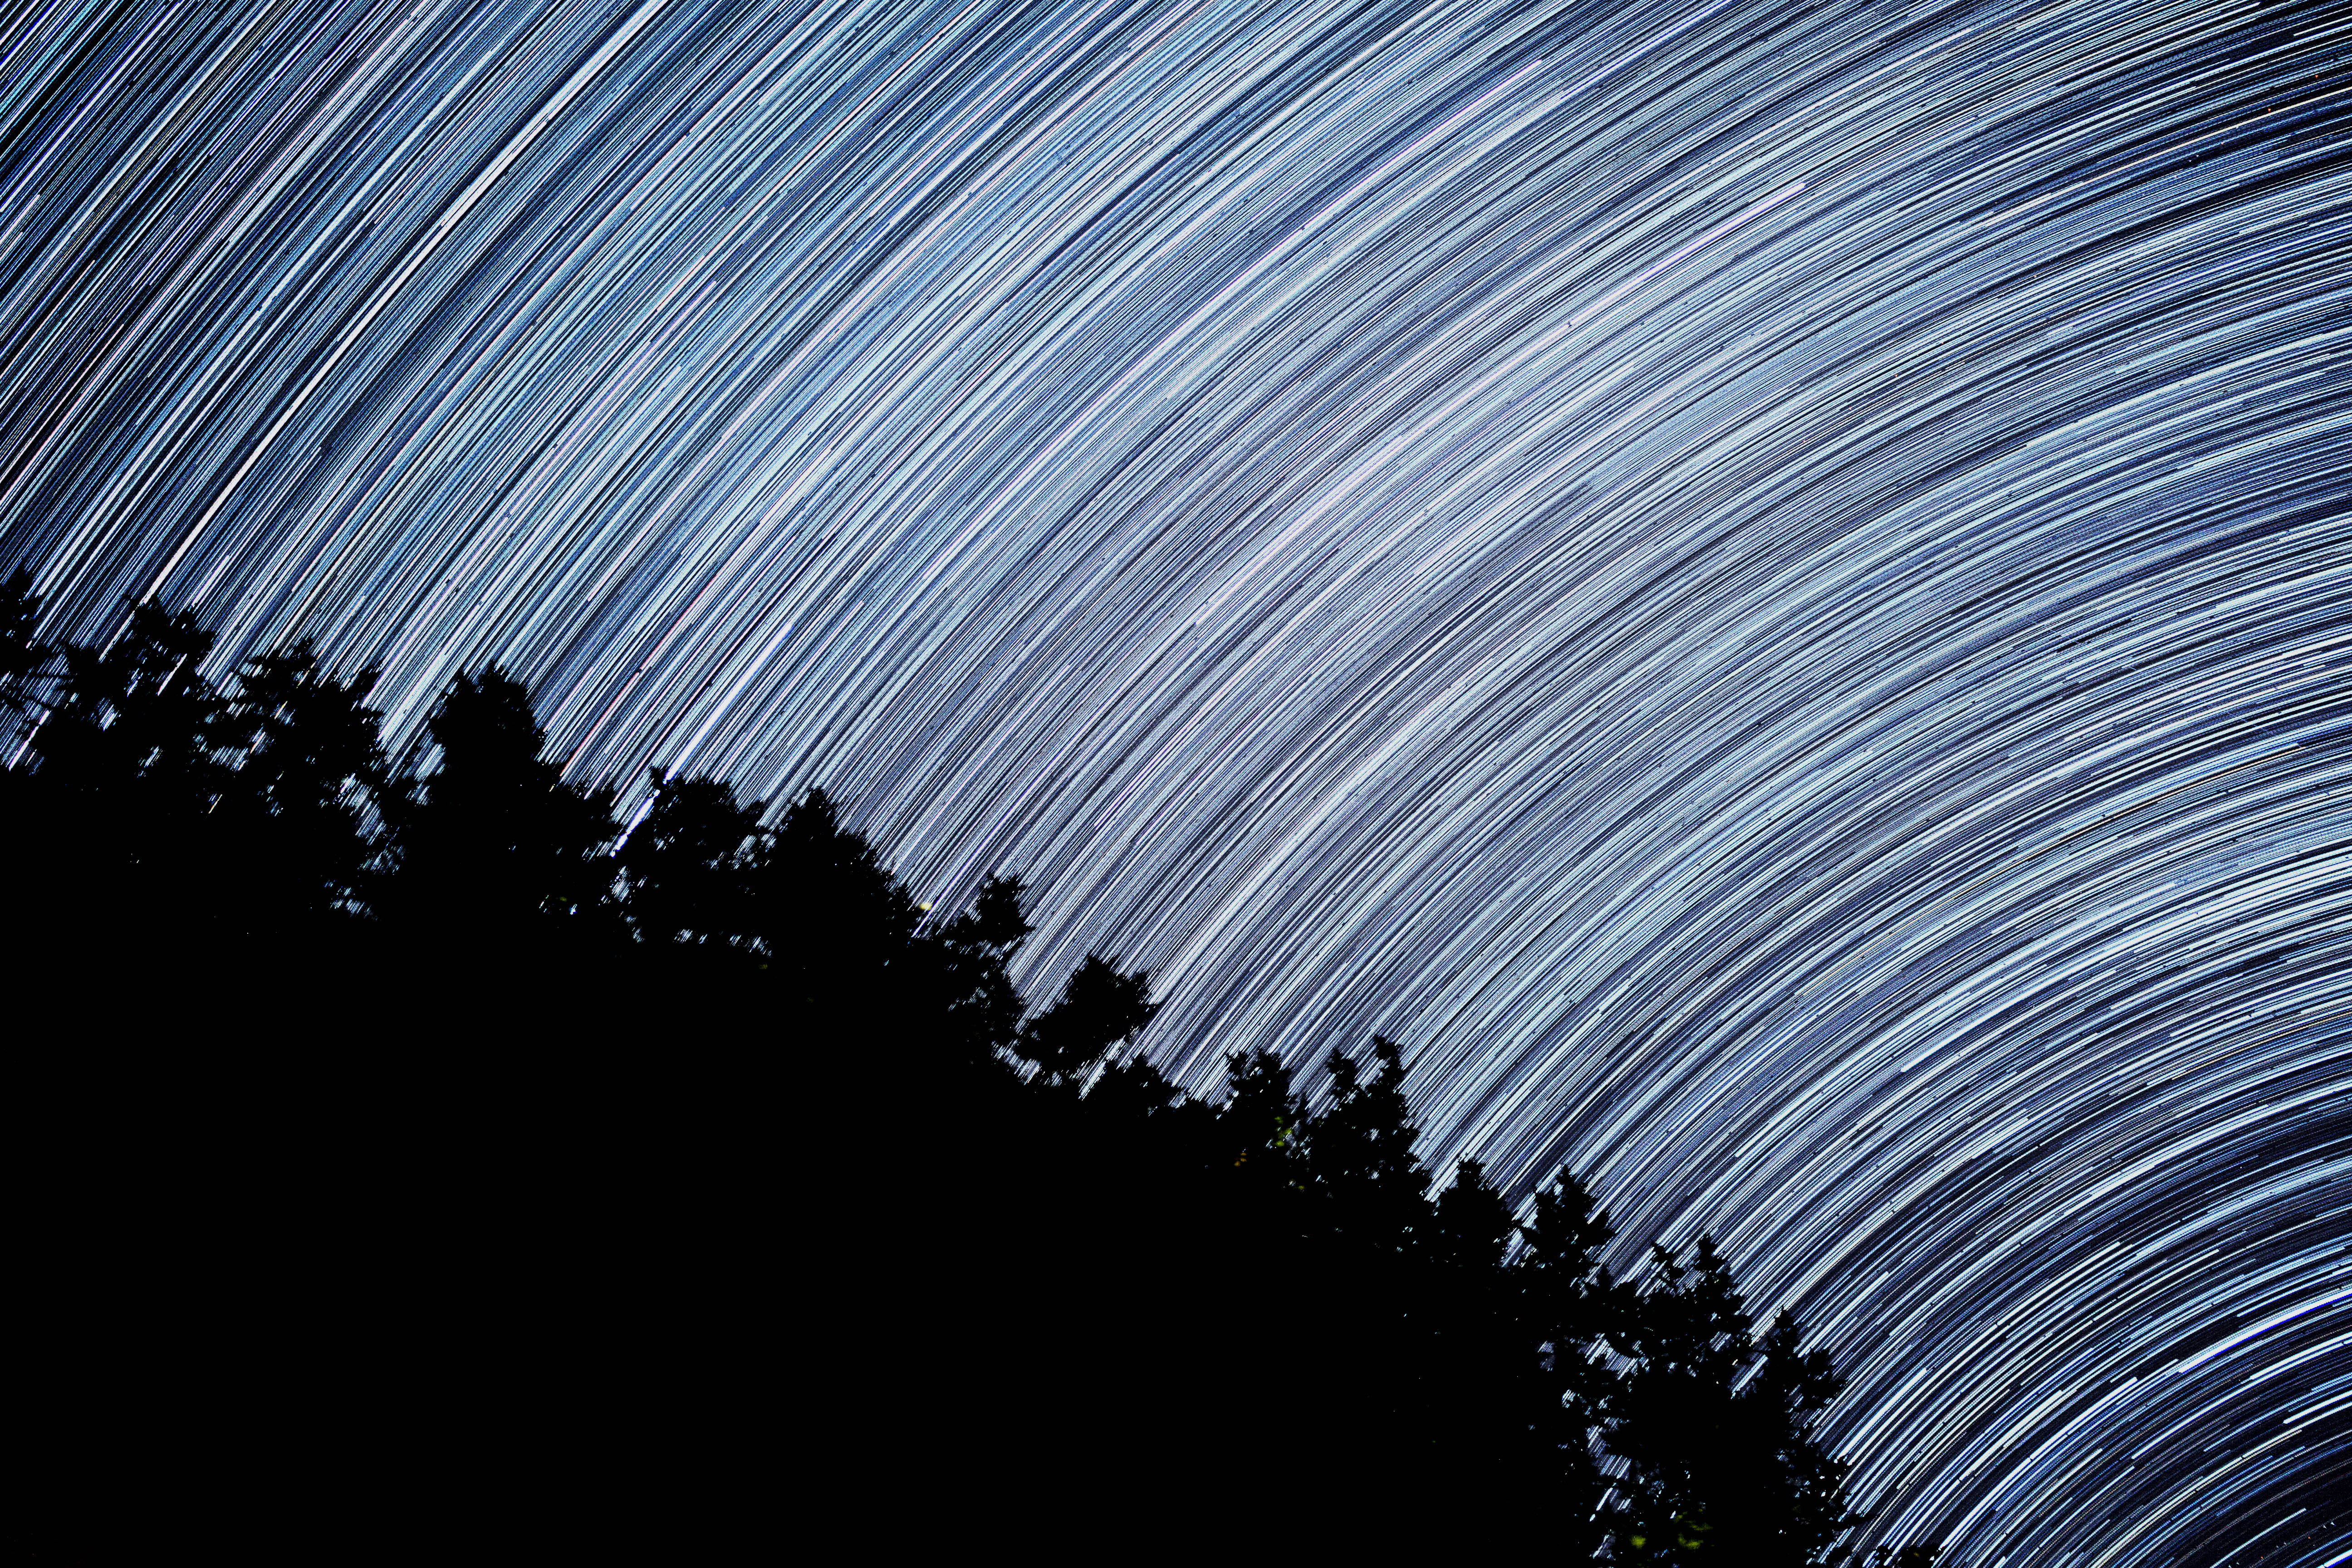 earth, star trail, nature, night, sky, time lapse